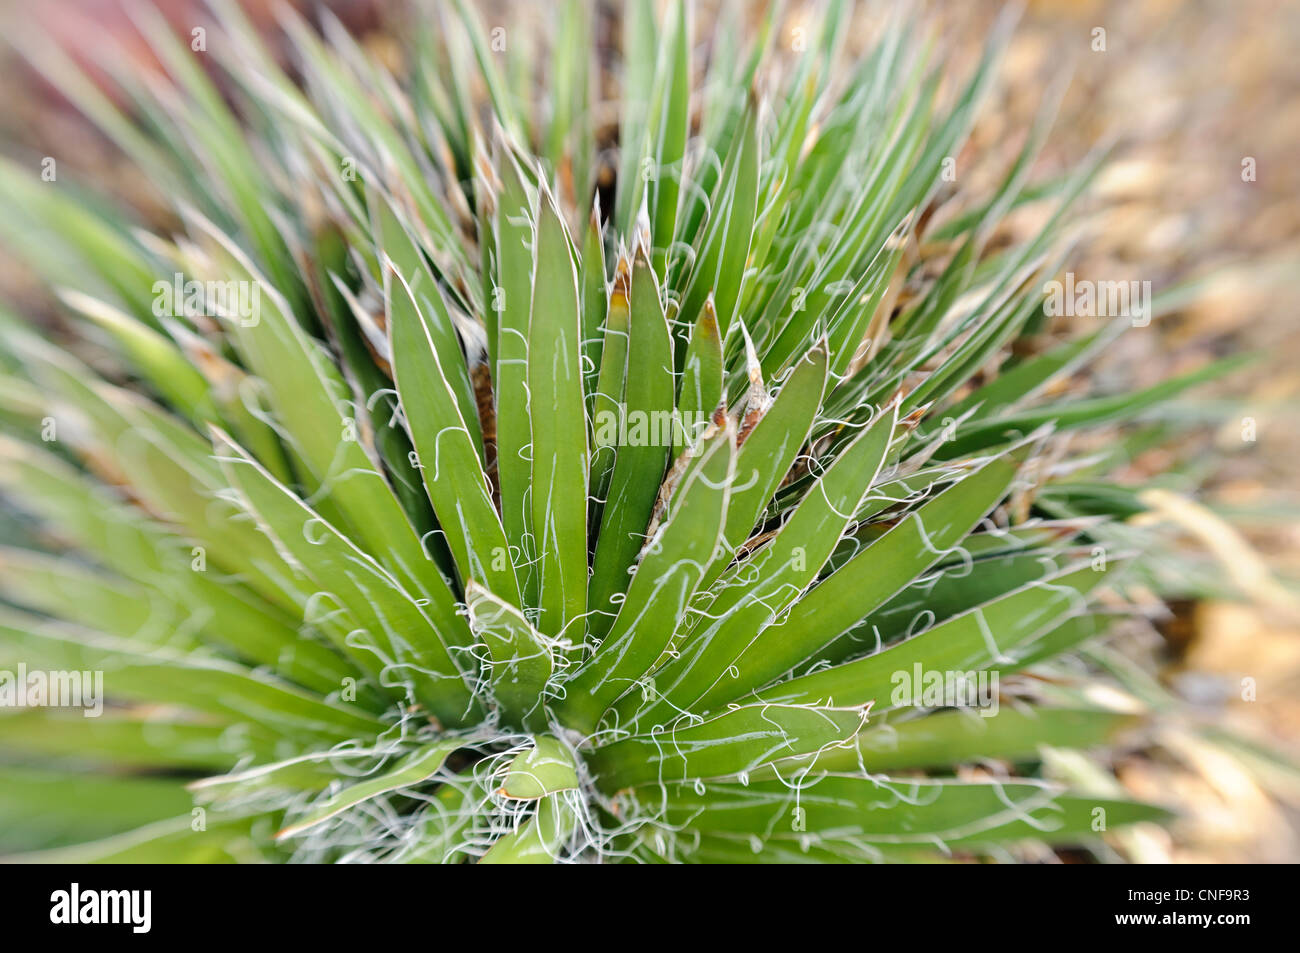 Agave plant Stock Photo